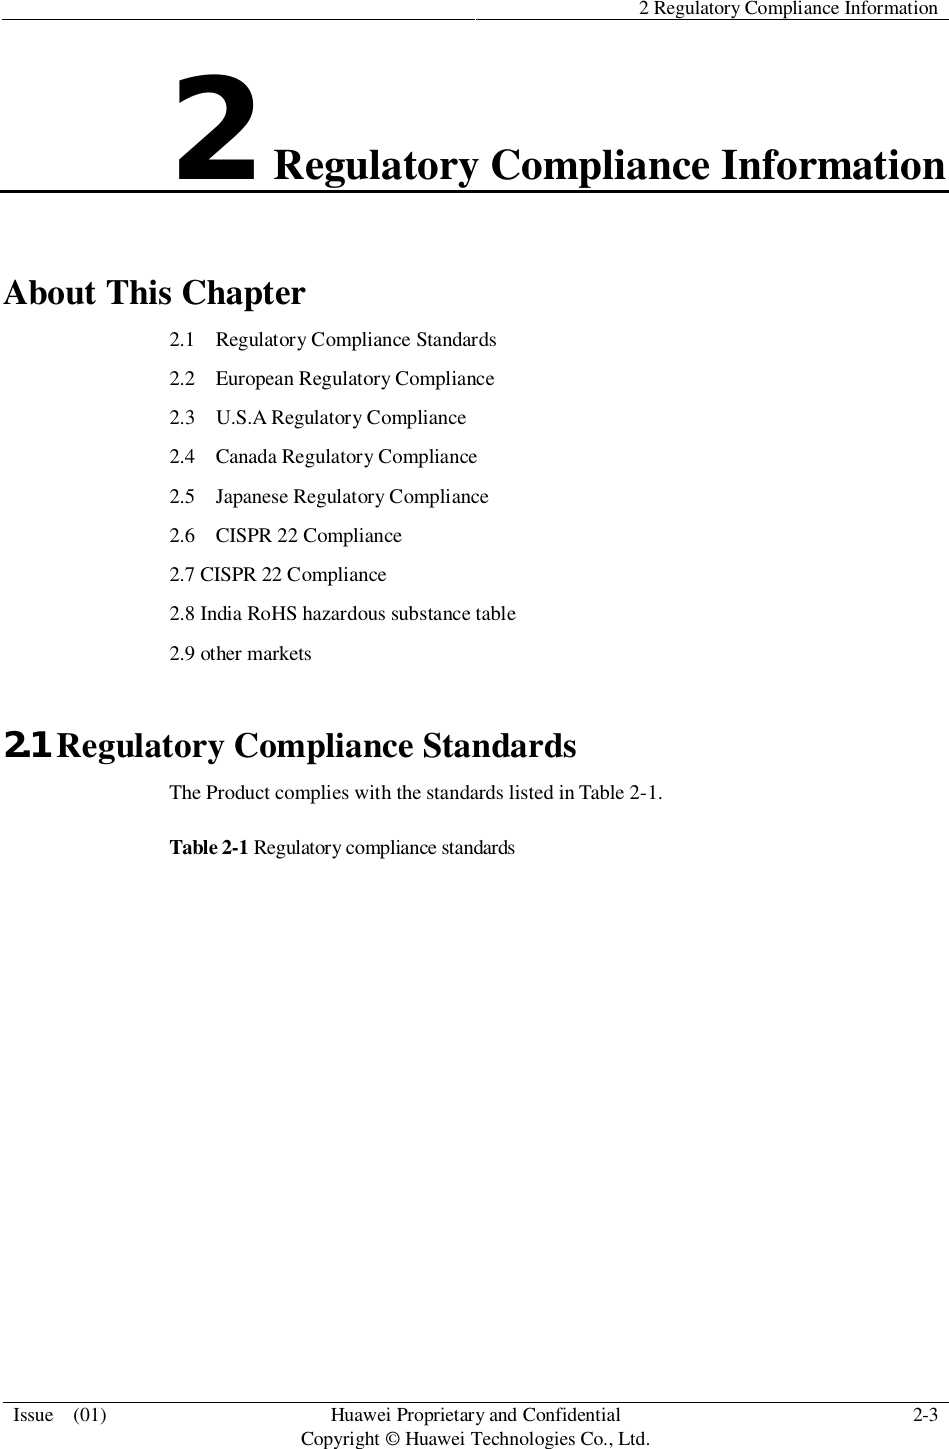 2 Regulatory Compliance InformationIssue  (01) HuaweiProprietary and ConfidentialCopyright © Huawei Technologies Co., Ltd. 2-32Regulatory Compliance InformationAbout This Chapter2.1   Regulatory Compliance Standards2.2   European Regulatory Compliance2.3 U.S.A Regulatory Compliance2.4   Canada Regulatory Compliance2.5   Japanese Regulatory Compliance2.6   CISPR 22 Compliance2.7 CISPR 22 Compliance2.8 India RoHS hazardous substance table2.9 other markets2.1 Regulatory Compliance StandardsThe Product complies with the standards listed in Table 2-1.Table 2-1 Regulatory compliance standards